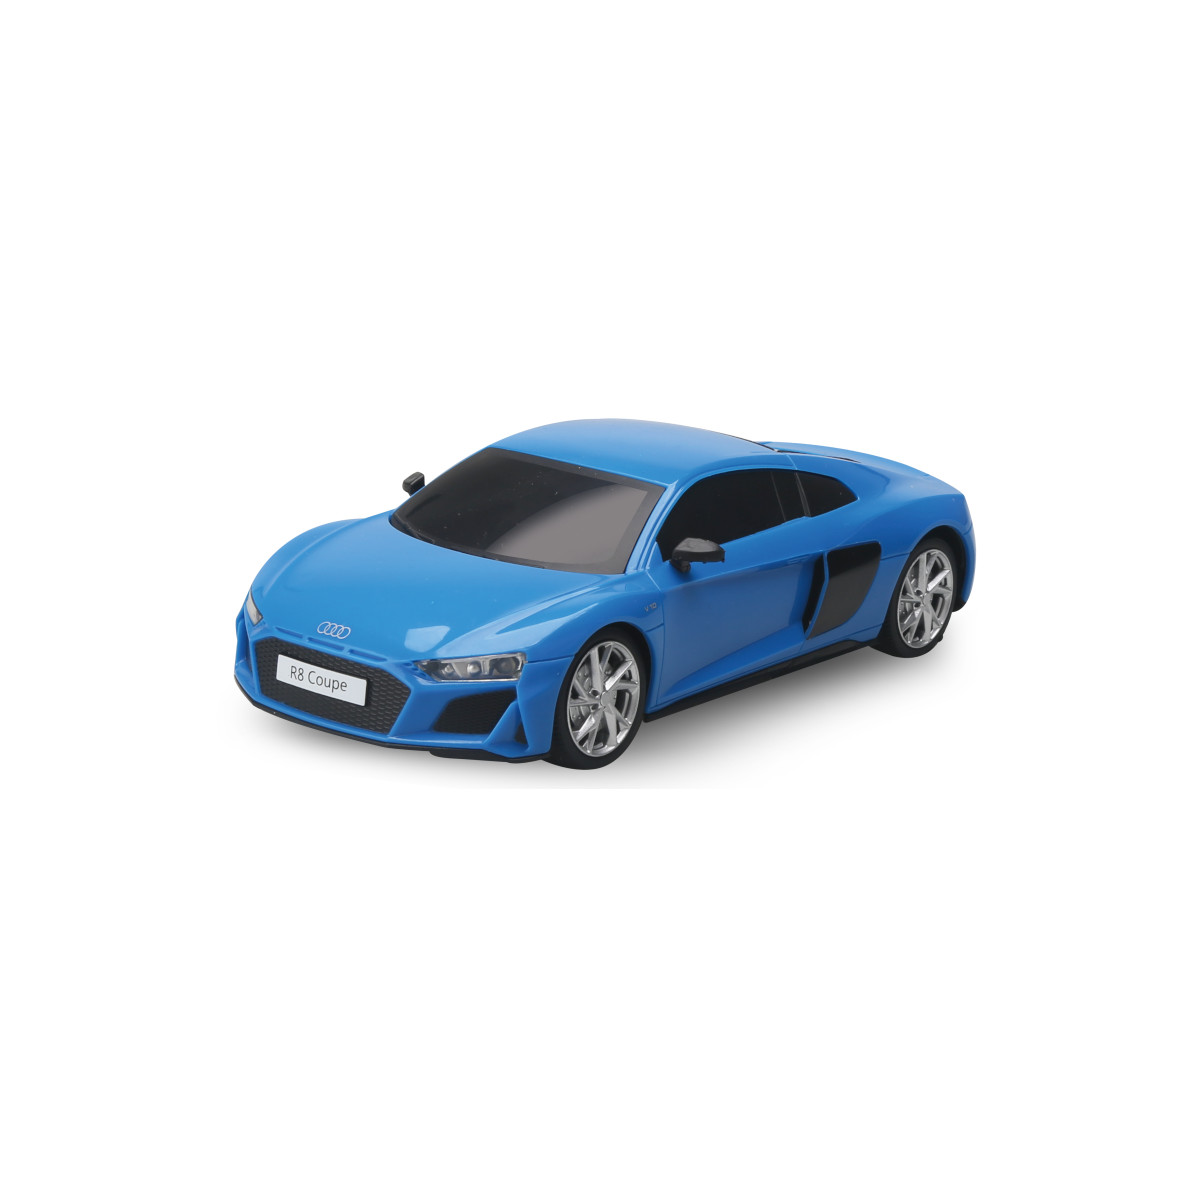 Besttoy - RC Audi R8 Coupe - 1 Stück